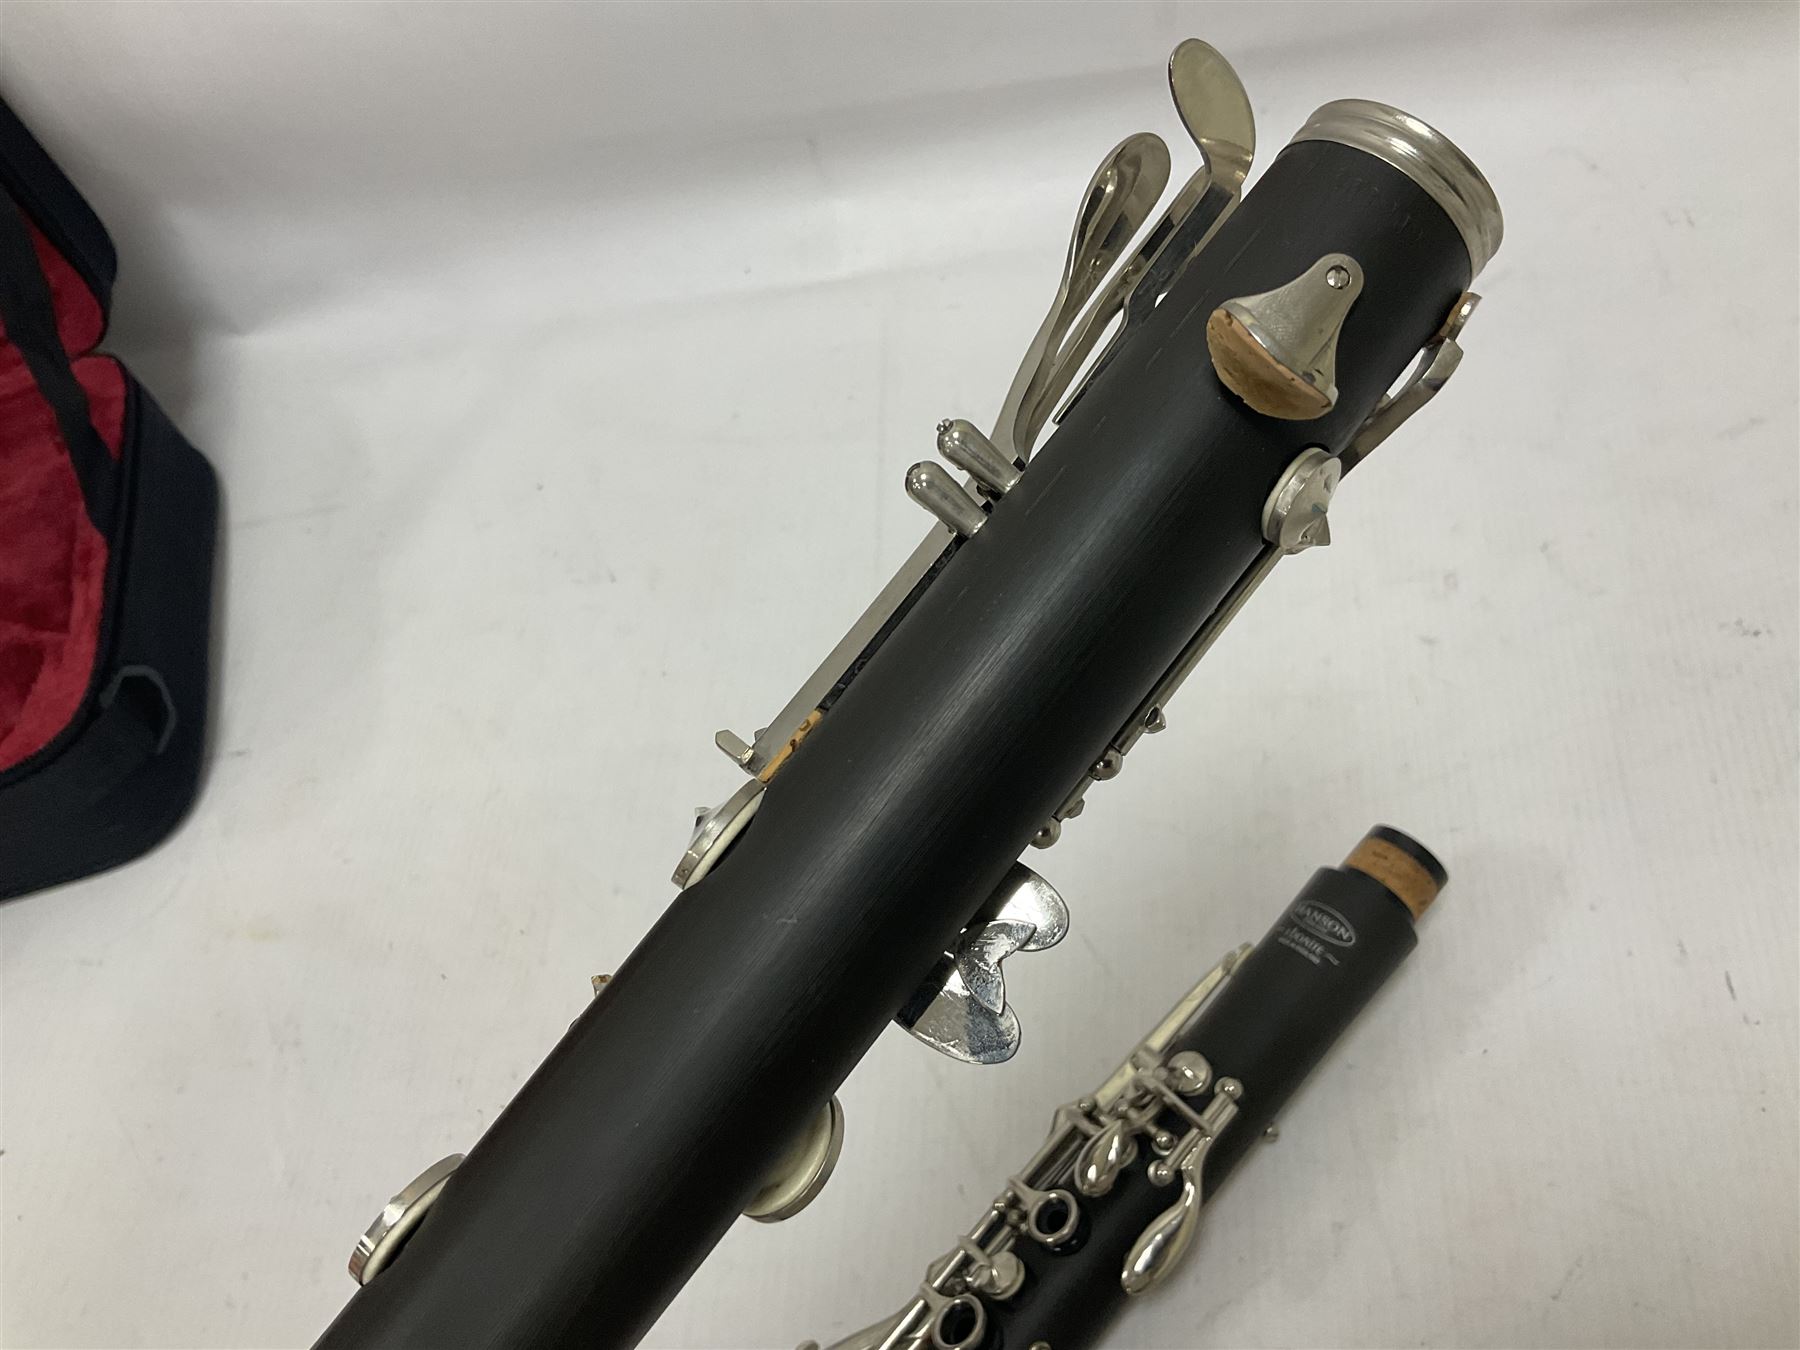 Hanson B Flat clarinet in a fitted case with accessories and three boxes of Vandoren reeds - Image 17 of 21